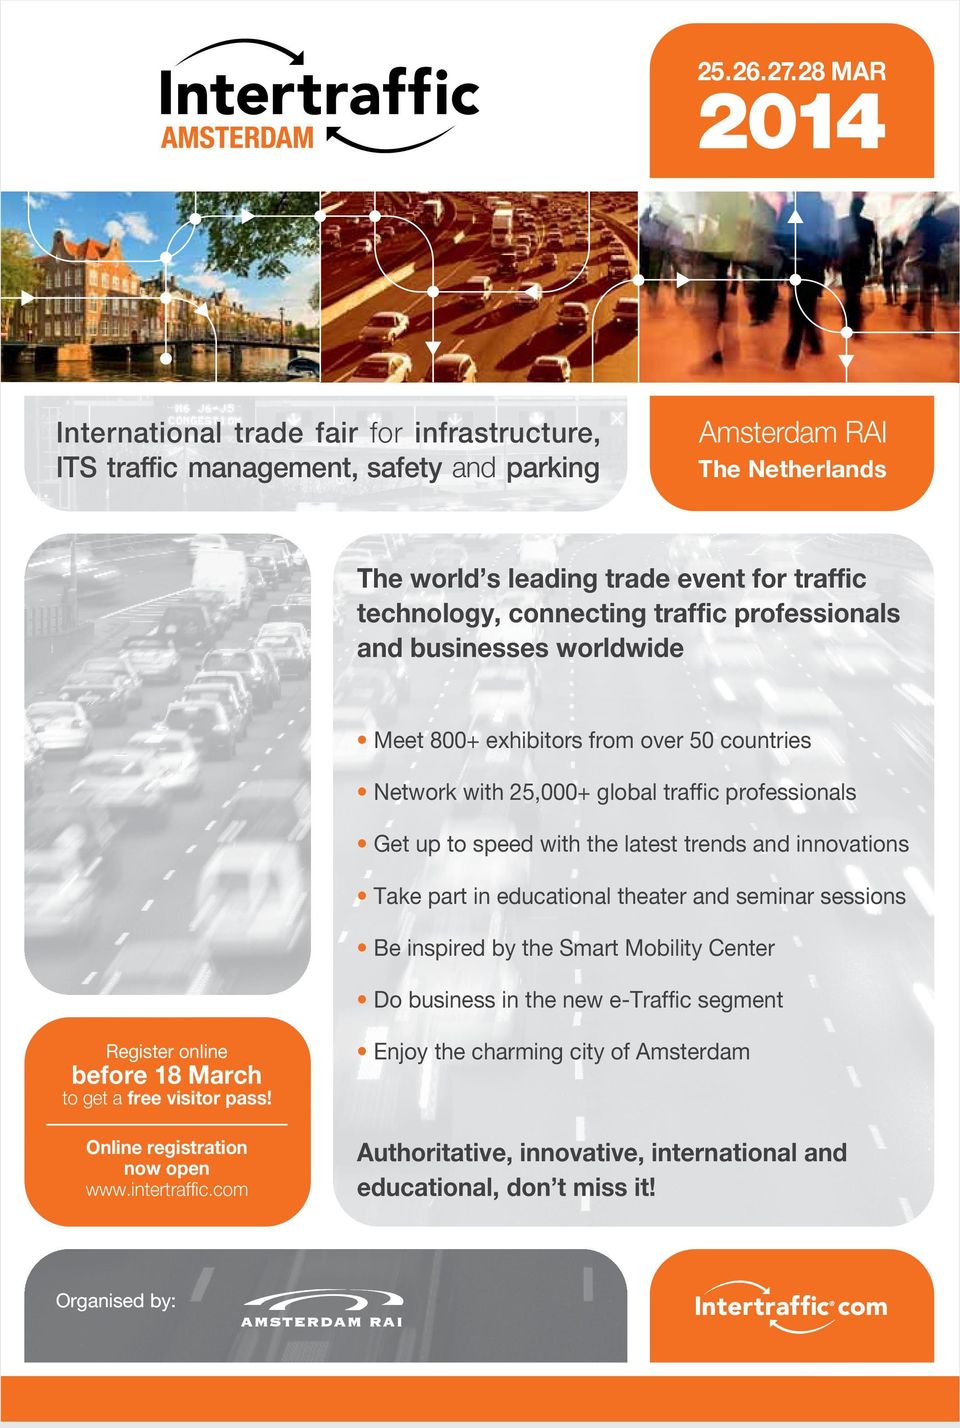 traffic professionals and businesses worldwide Meet 800+ exhibitors from over 50 countries Network with 25,000+ global traffic professionals Get up to speed with the latest trends and innovations